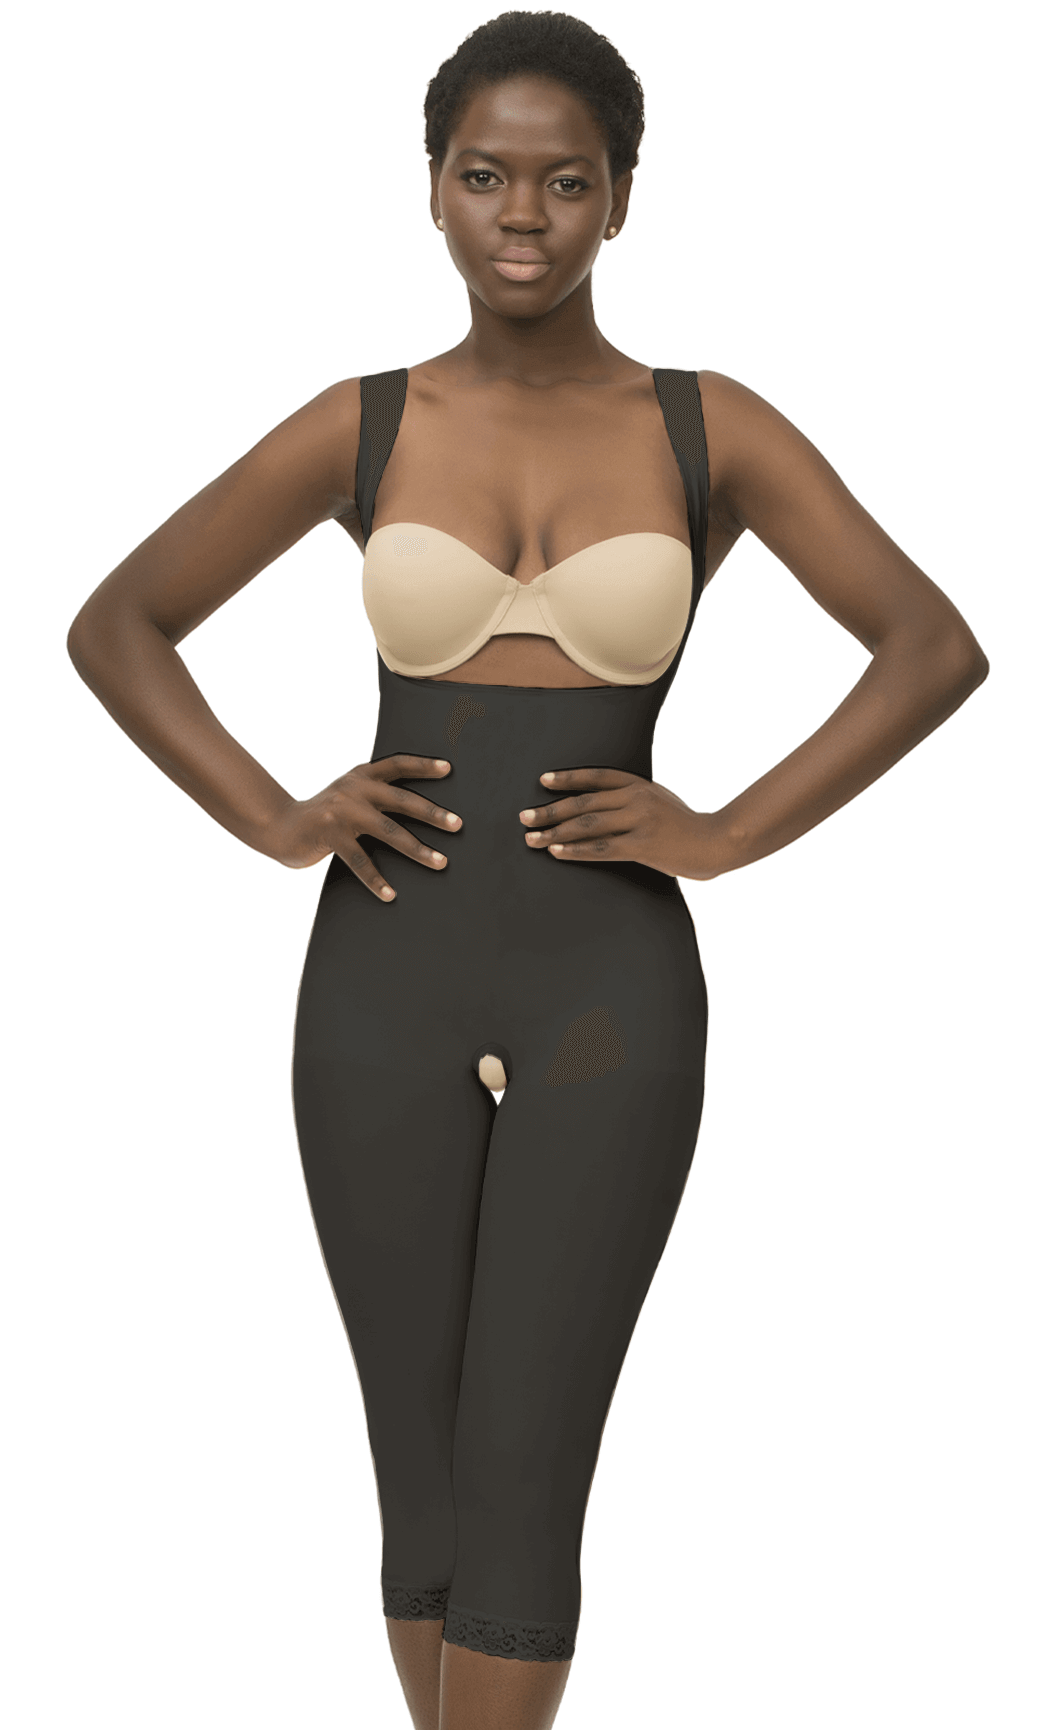 Body Suit Below the Knee Length with Suspender Closed Buttocks Enhanci